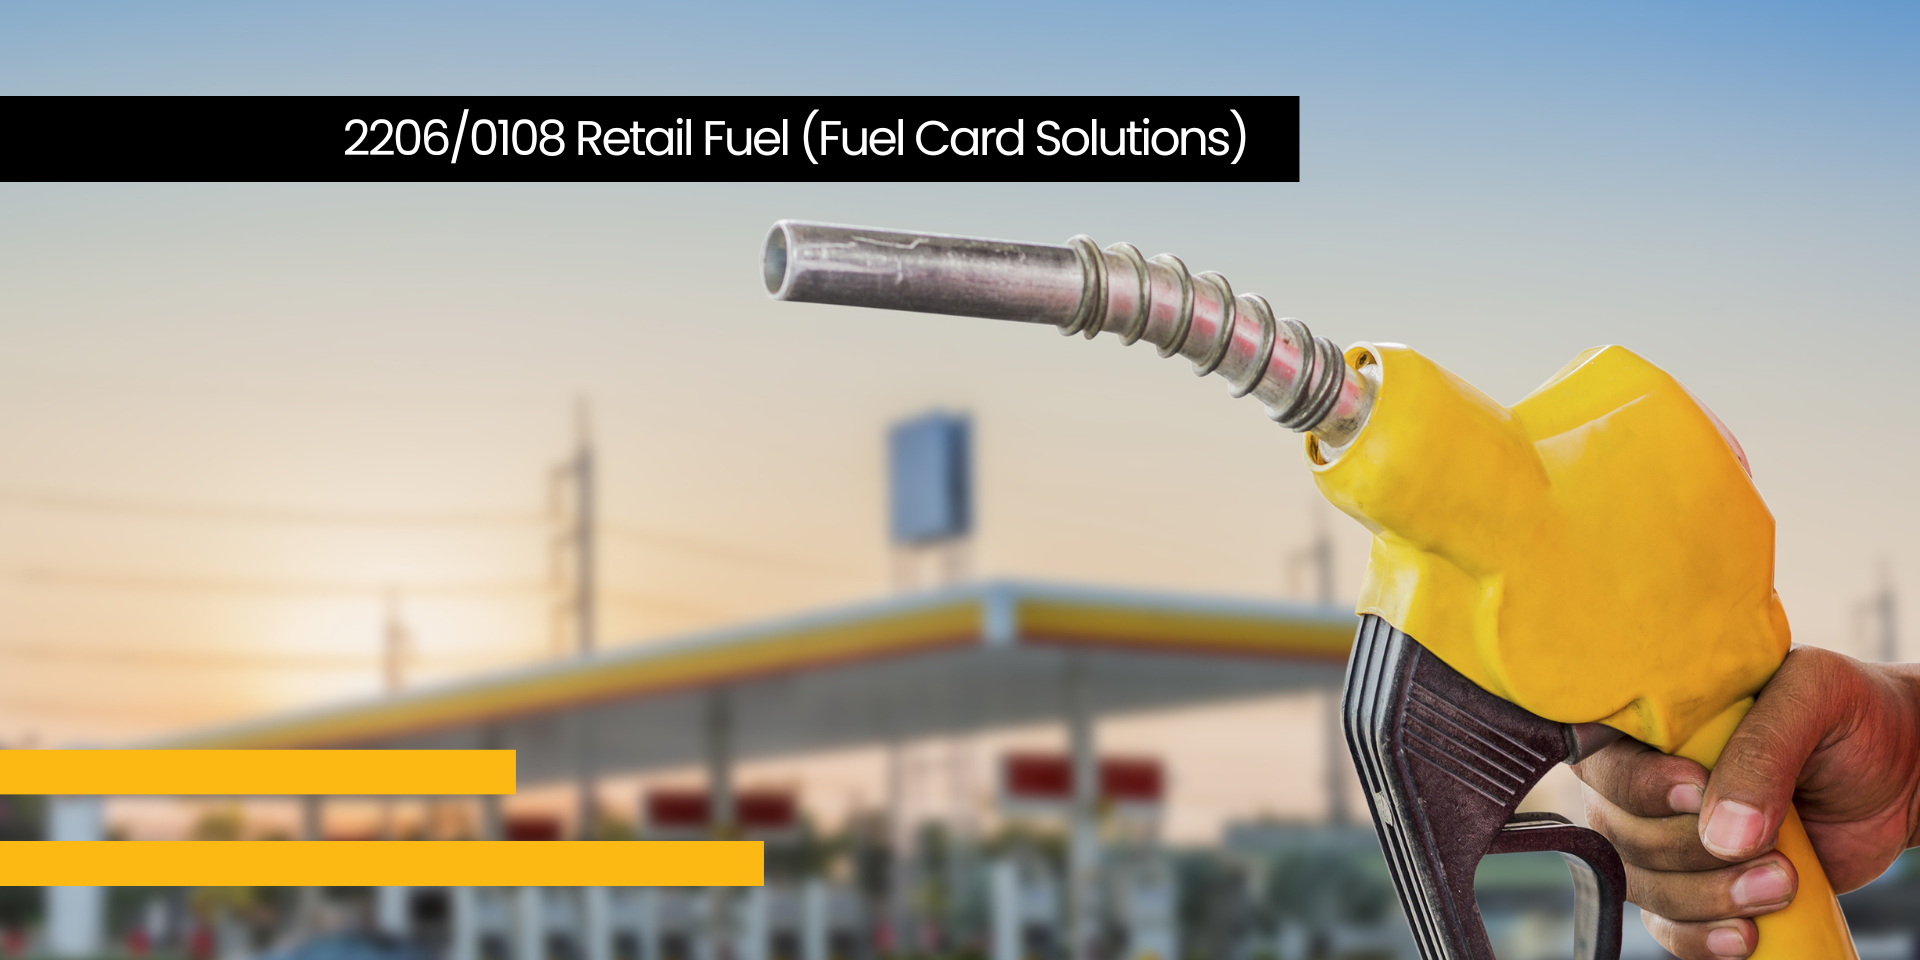 Contract extension 22060108 Retail Fuel (Fuel Card Solutions)